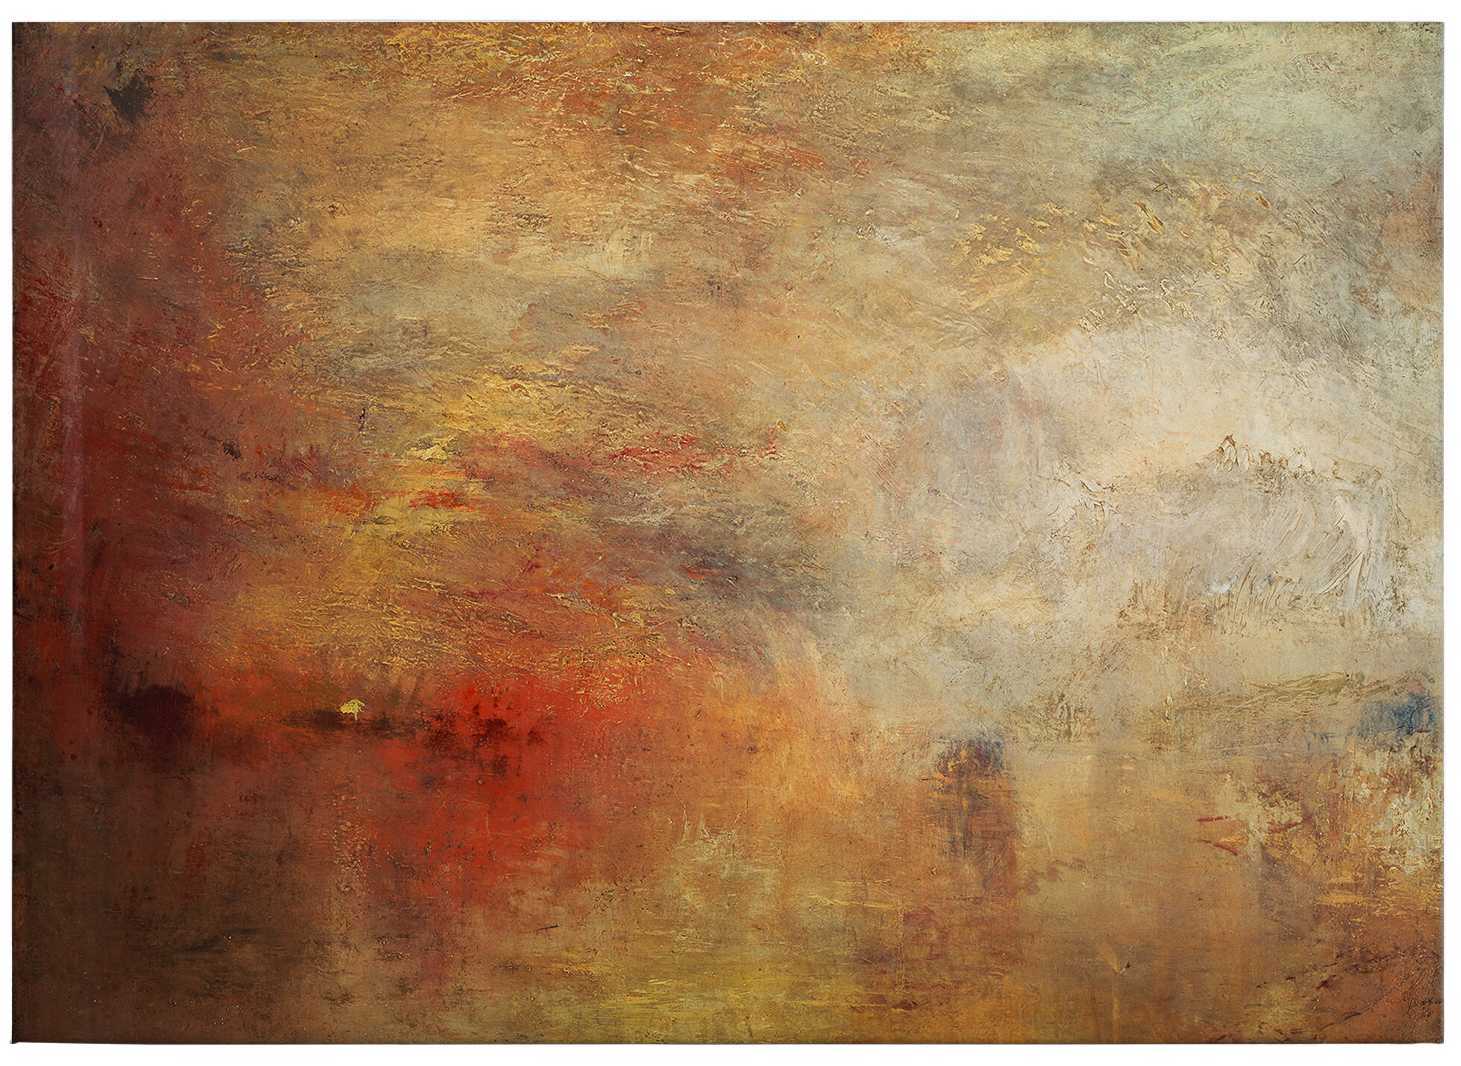             Canvas print "Sunset over the sea" by Turner
        